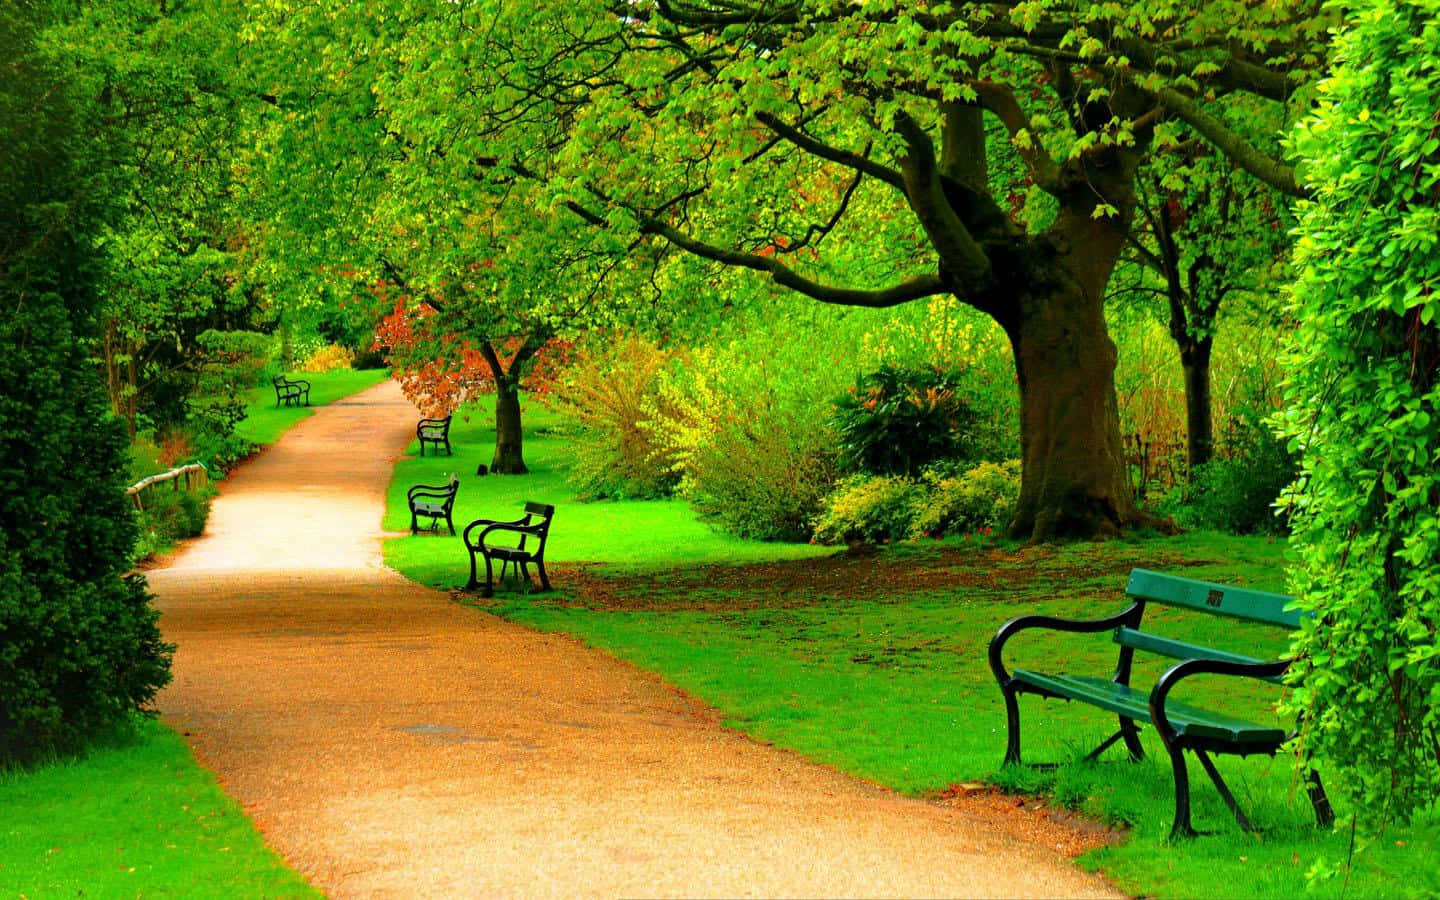 Relishing the beauty of nature in a peaceful park